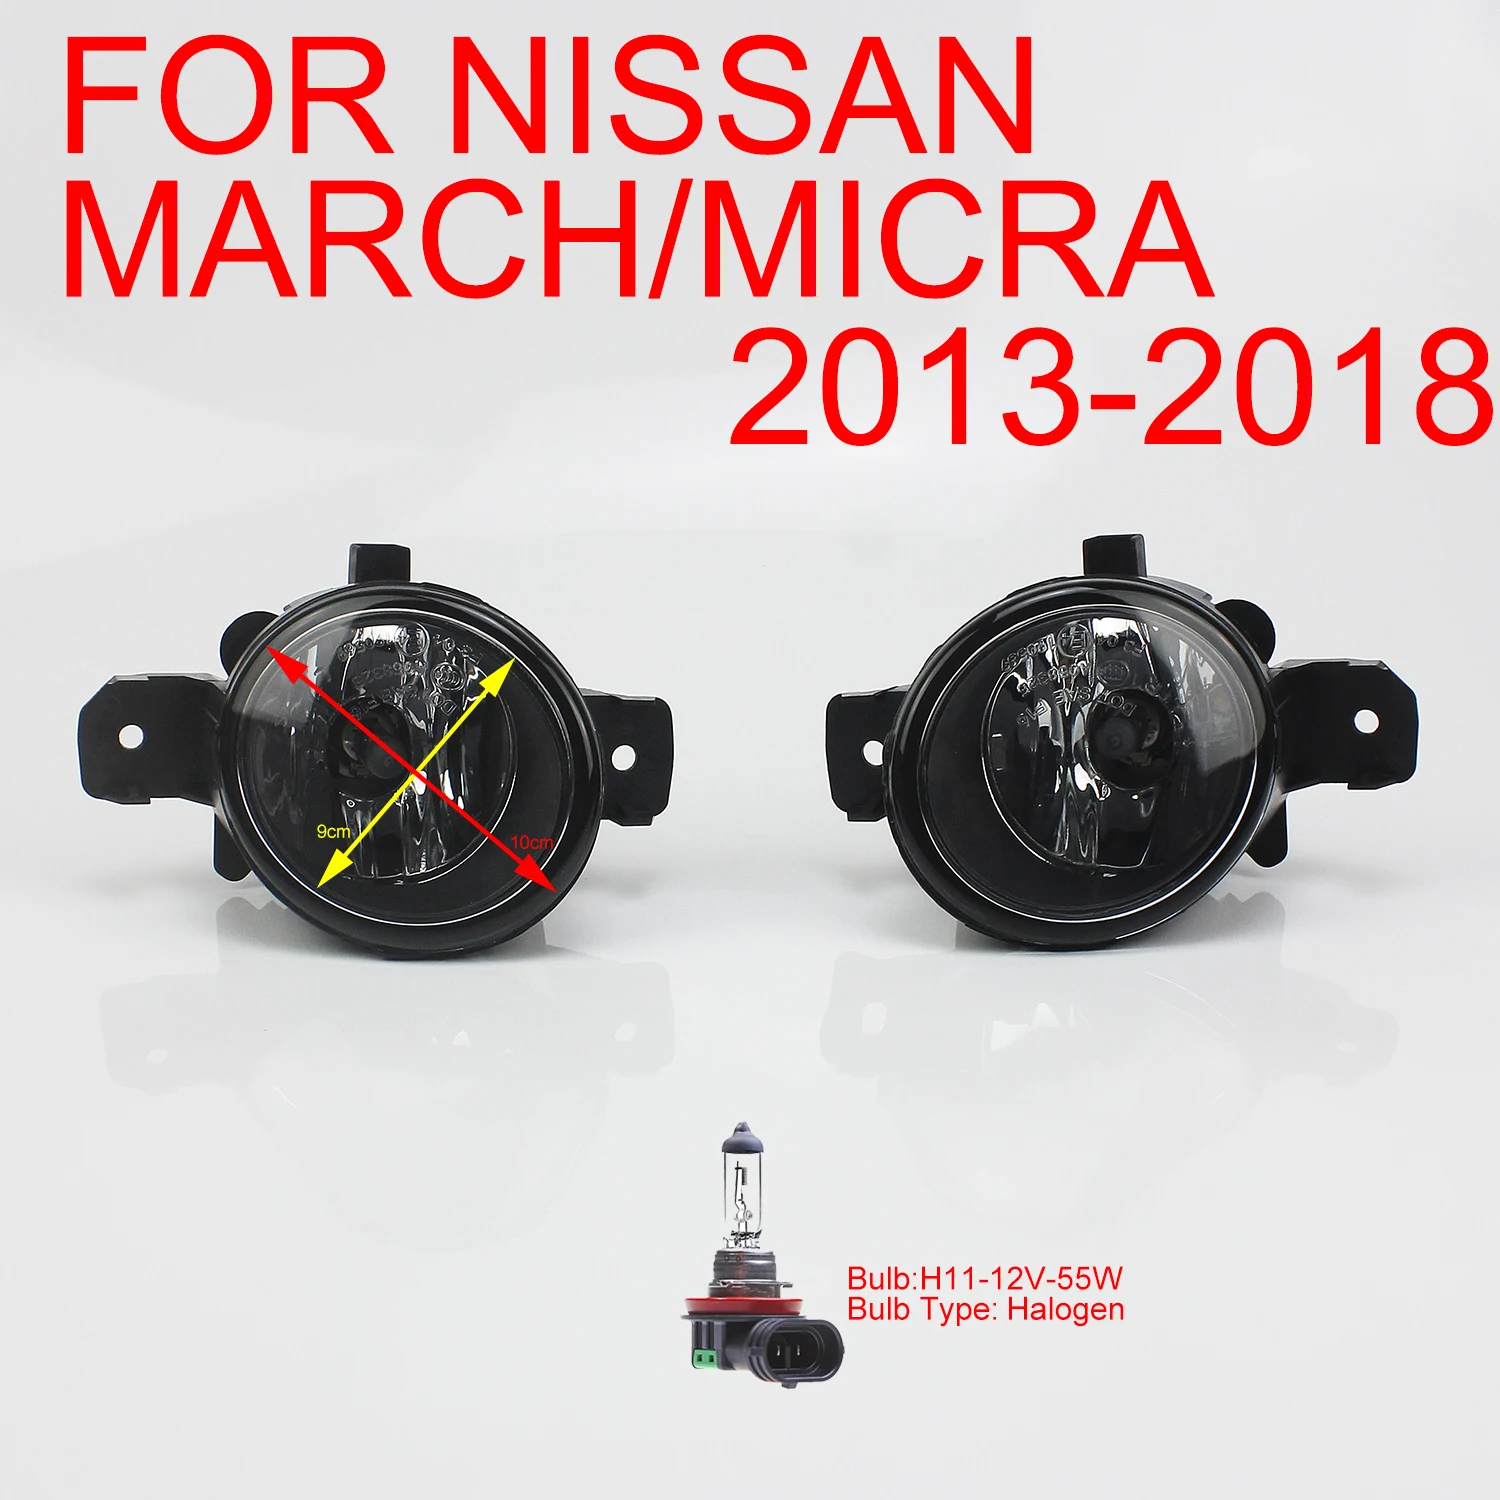 

Pair Of Fog Light Driving Lamps For Nissan March/Micra 13-18 Maxima Cefiro Teana Qashqai Right + Left Side w/Bulb:H11-12V-55W